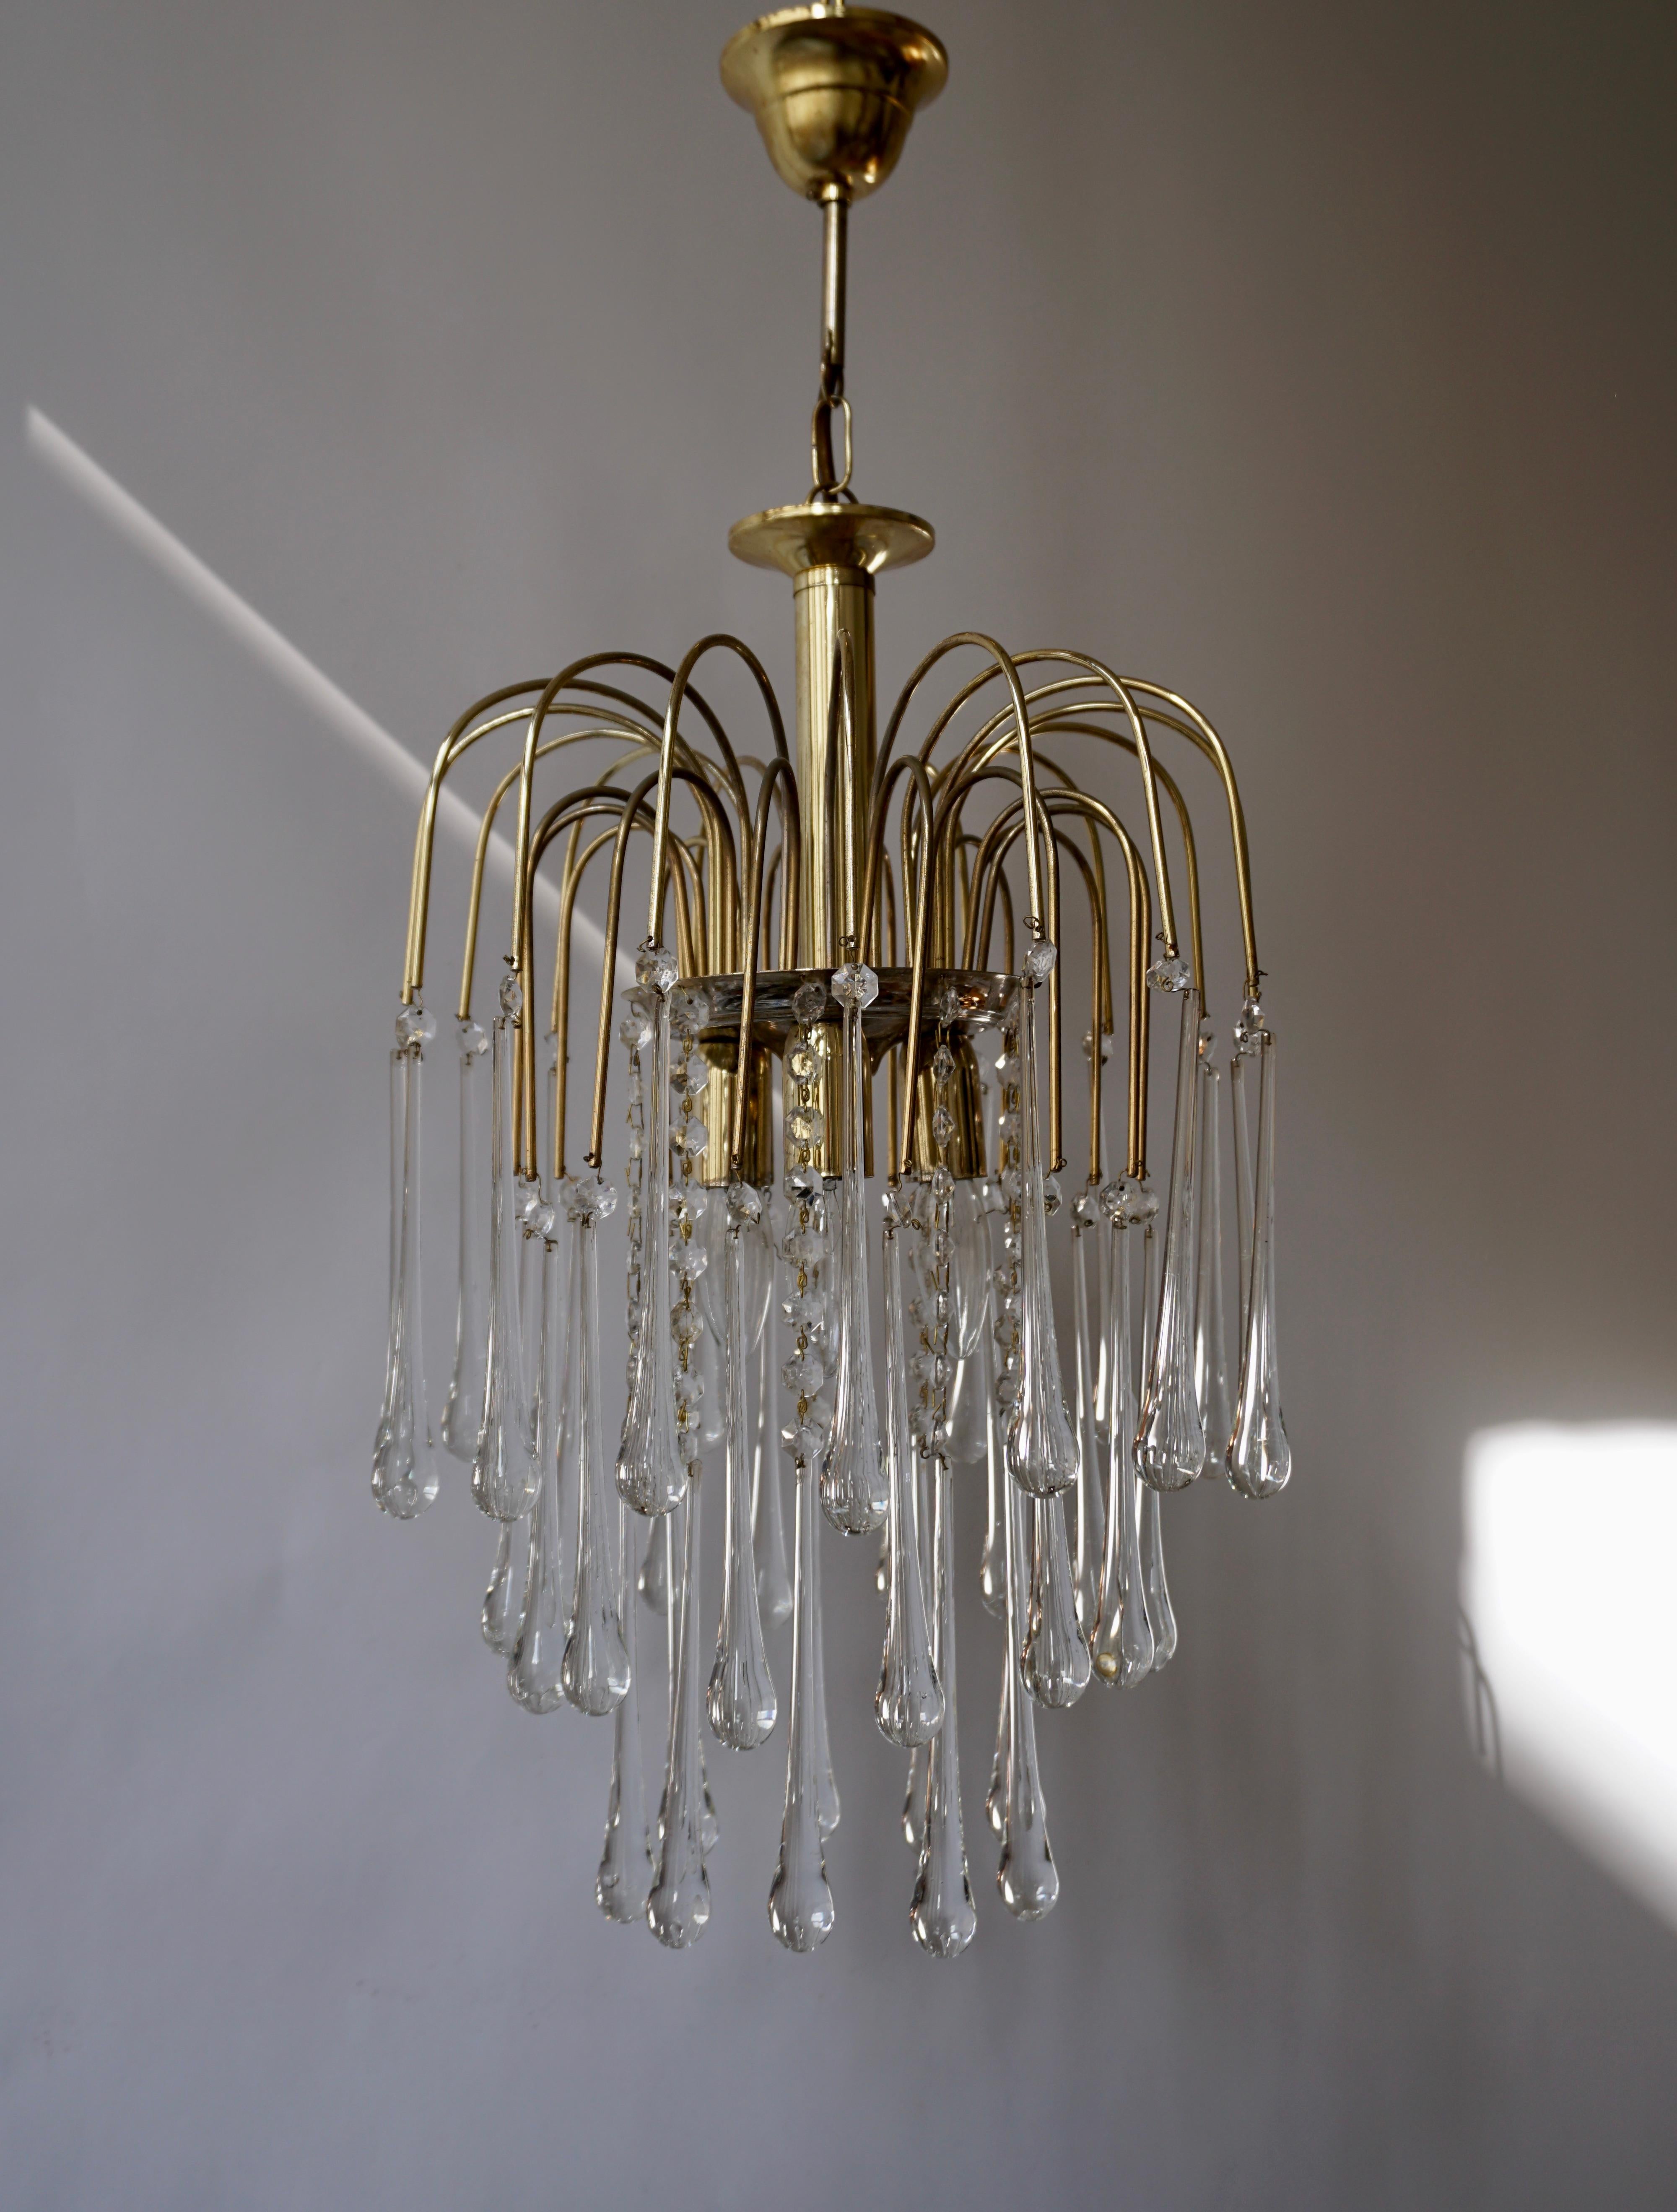 Italian brass and Murano glass teardrop chandelier.
Measure:
Diameter 32 cm.
Height fixture 50 cm.
Total height with the chain 70 cm.